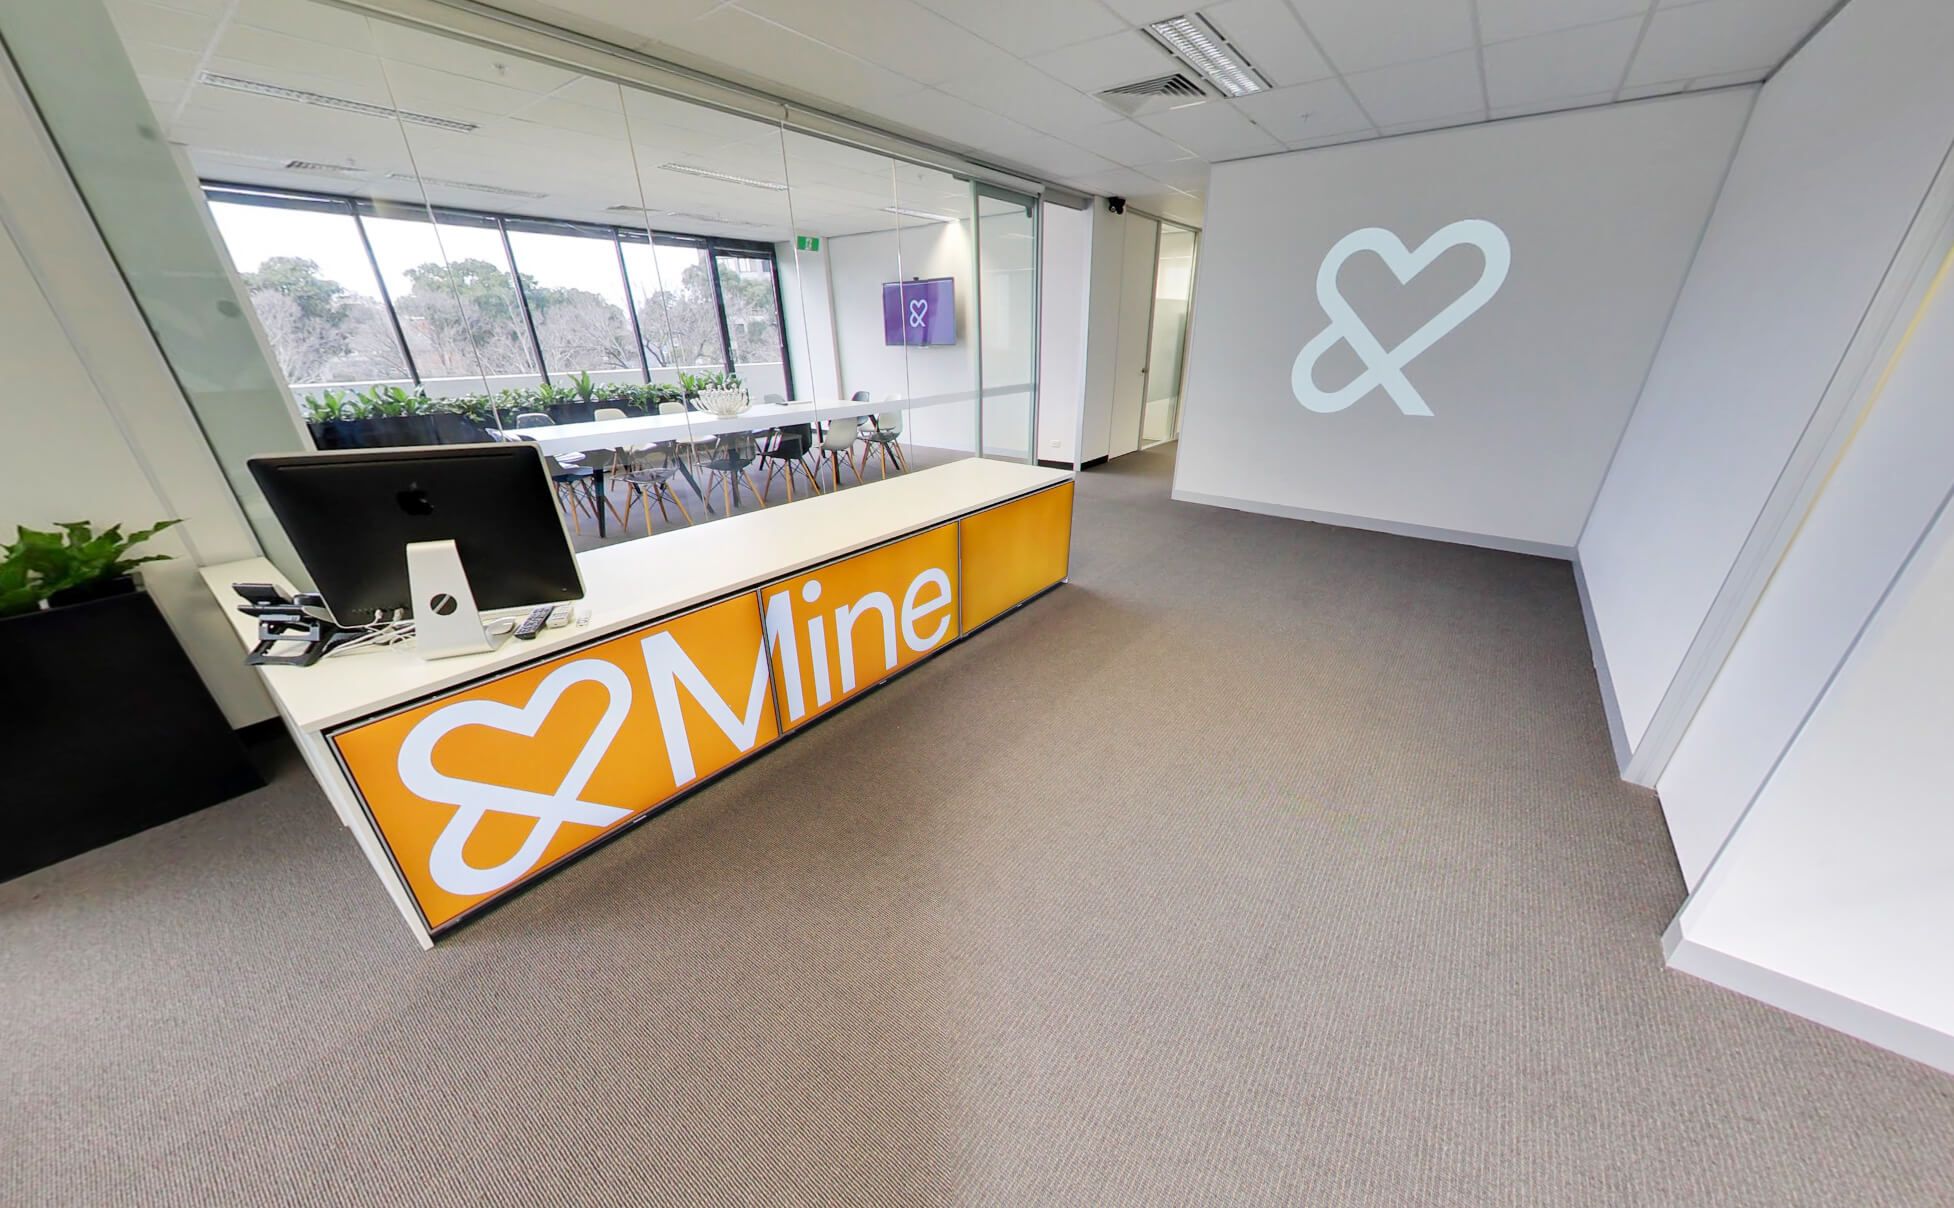 Ever wondered what &Mine HQ looked like? Look no further!